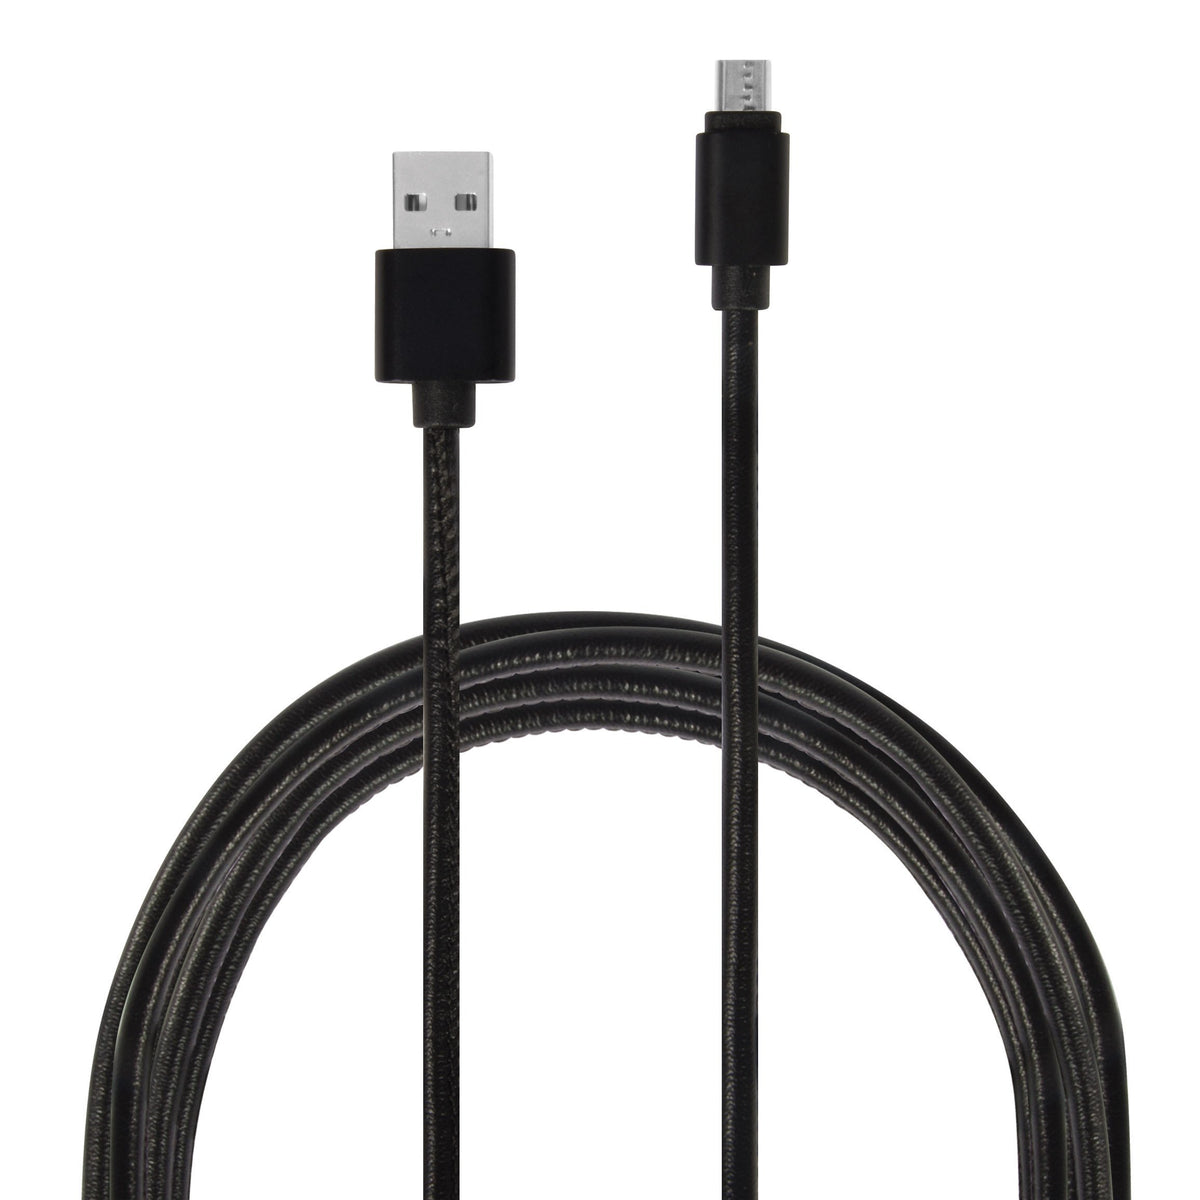 IS Gifts Mobile Phone Accessories Black / Micro USB (Android) Android/IOS PU Leather USB Charging Cable - 2mtr 838310042959 tween and teen